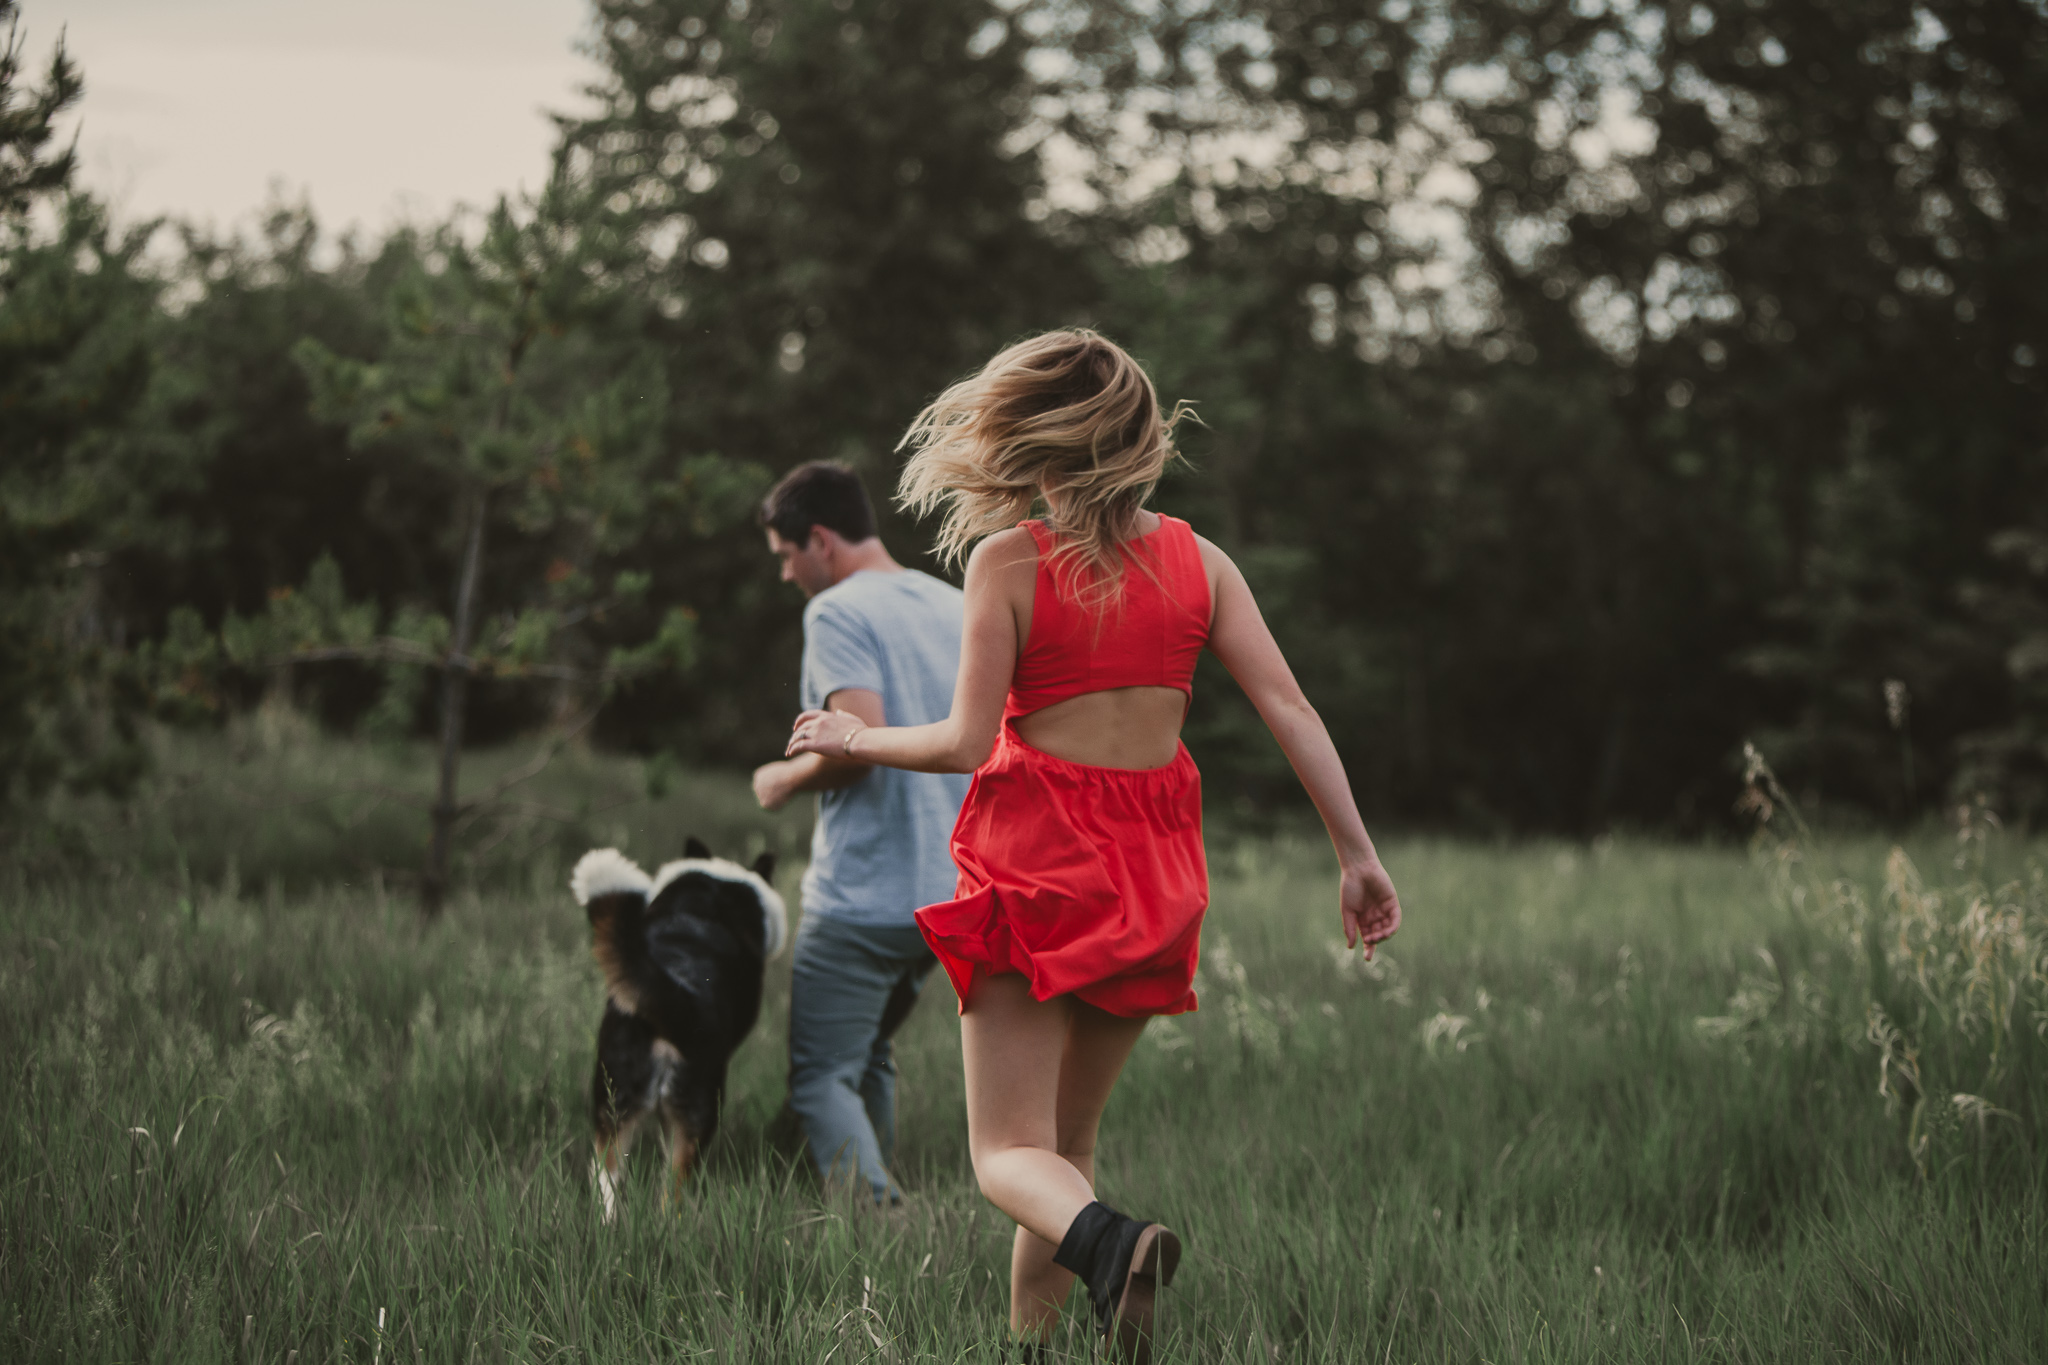 woman in red dress chases man and dog in the grass